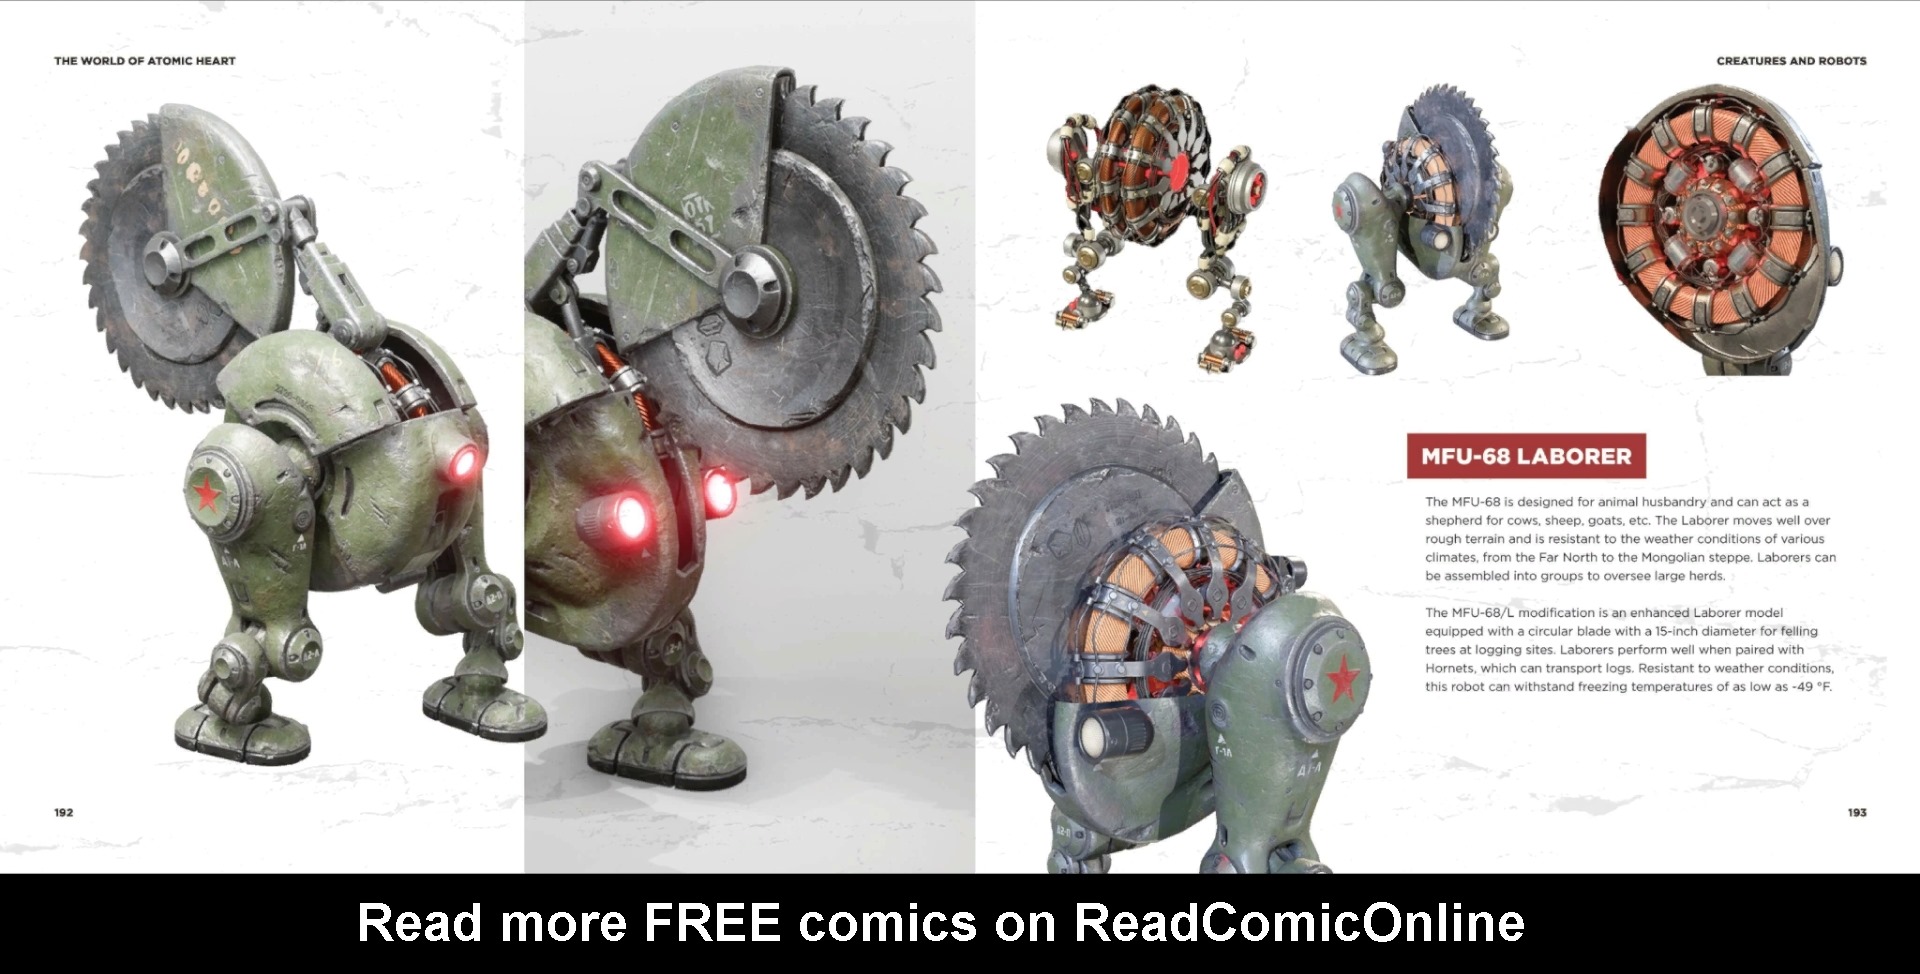 Read online The World of Atomic Heart comic -  Issue # TPB - 100